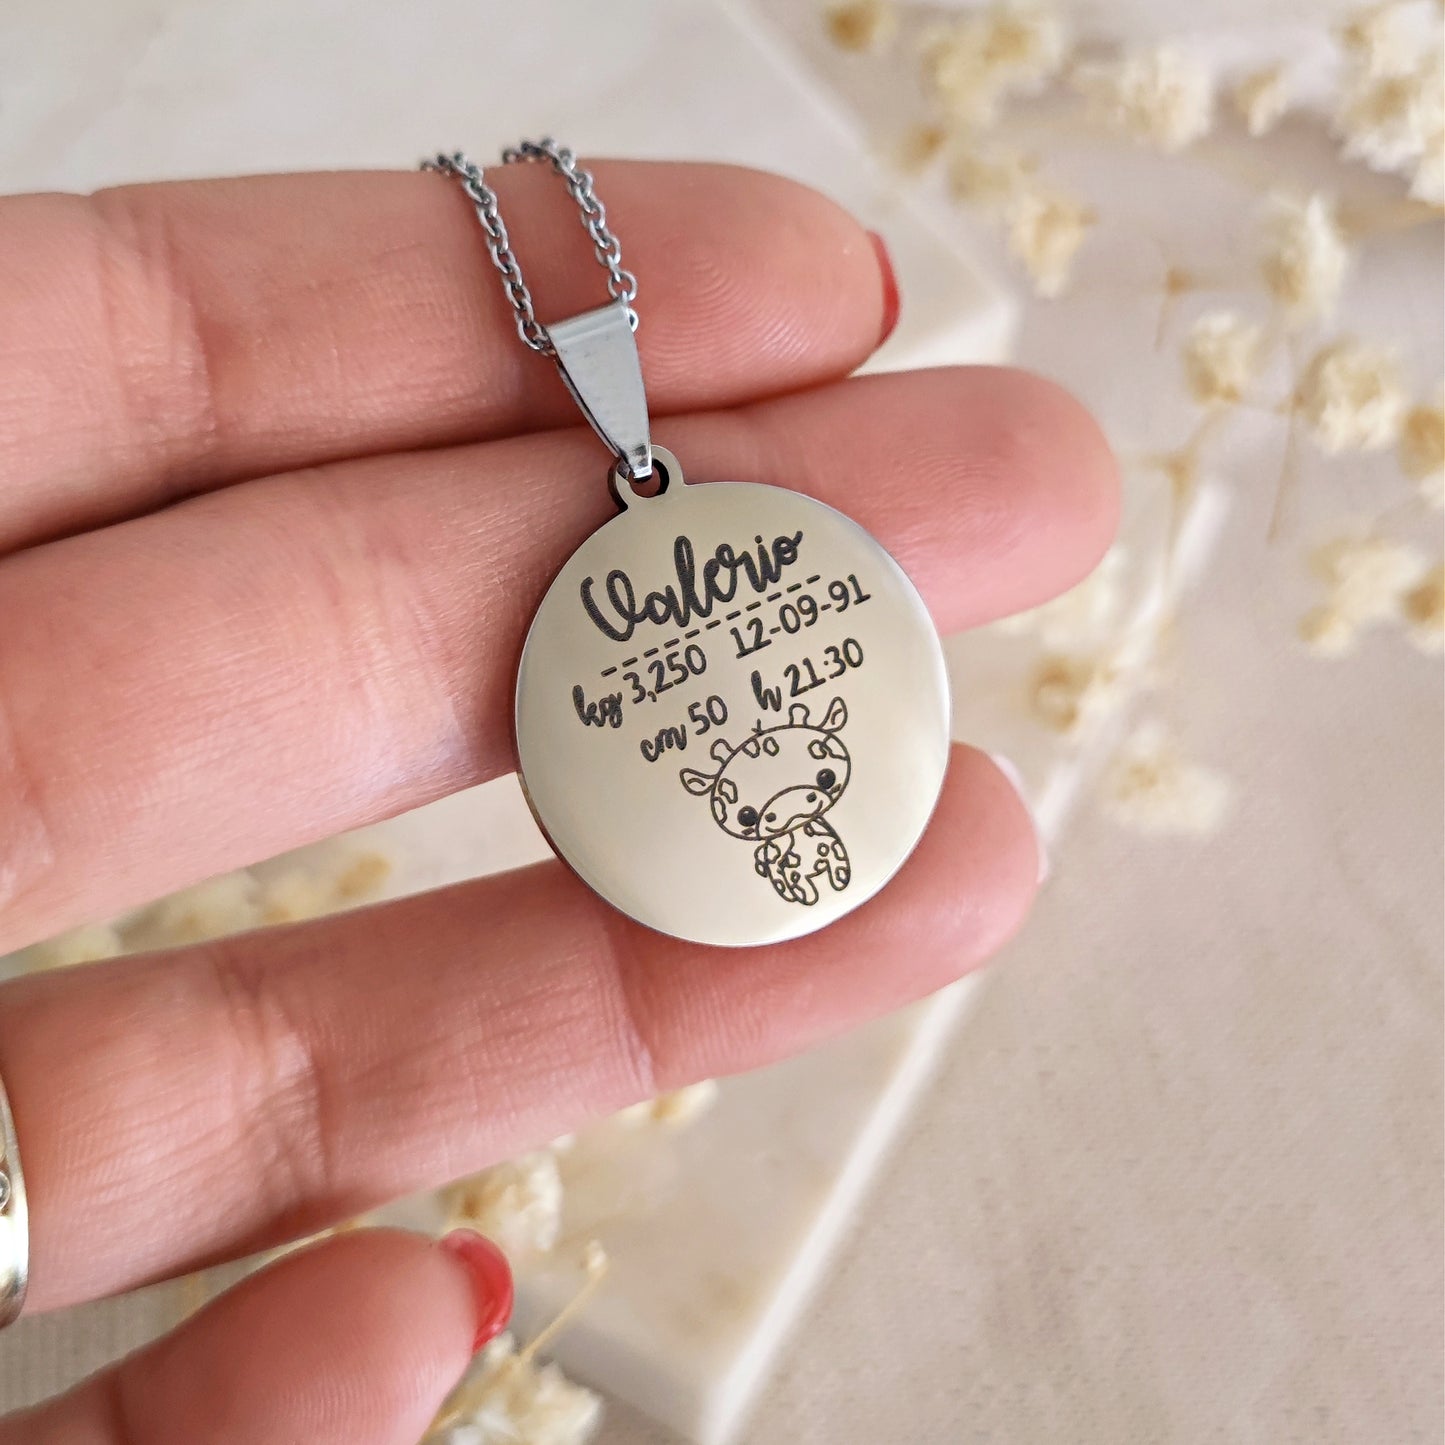 New Baby Necklace, New Mom New Dad Gift, Personalized Jewelry, Baby Arrival, Mommy & Daddy Keychain, Welcome Baby Gift Name Birth Date